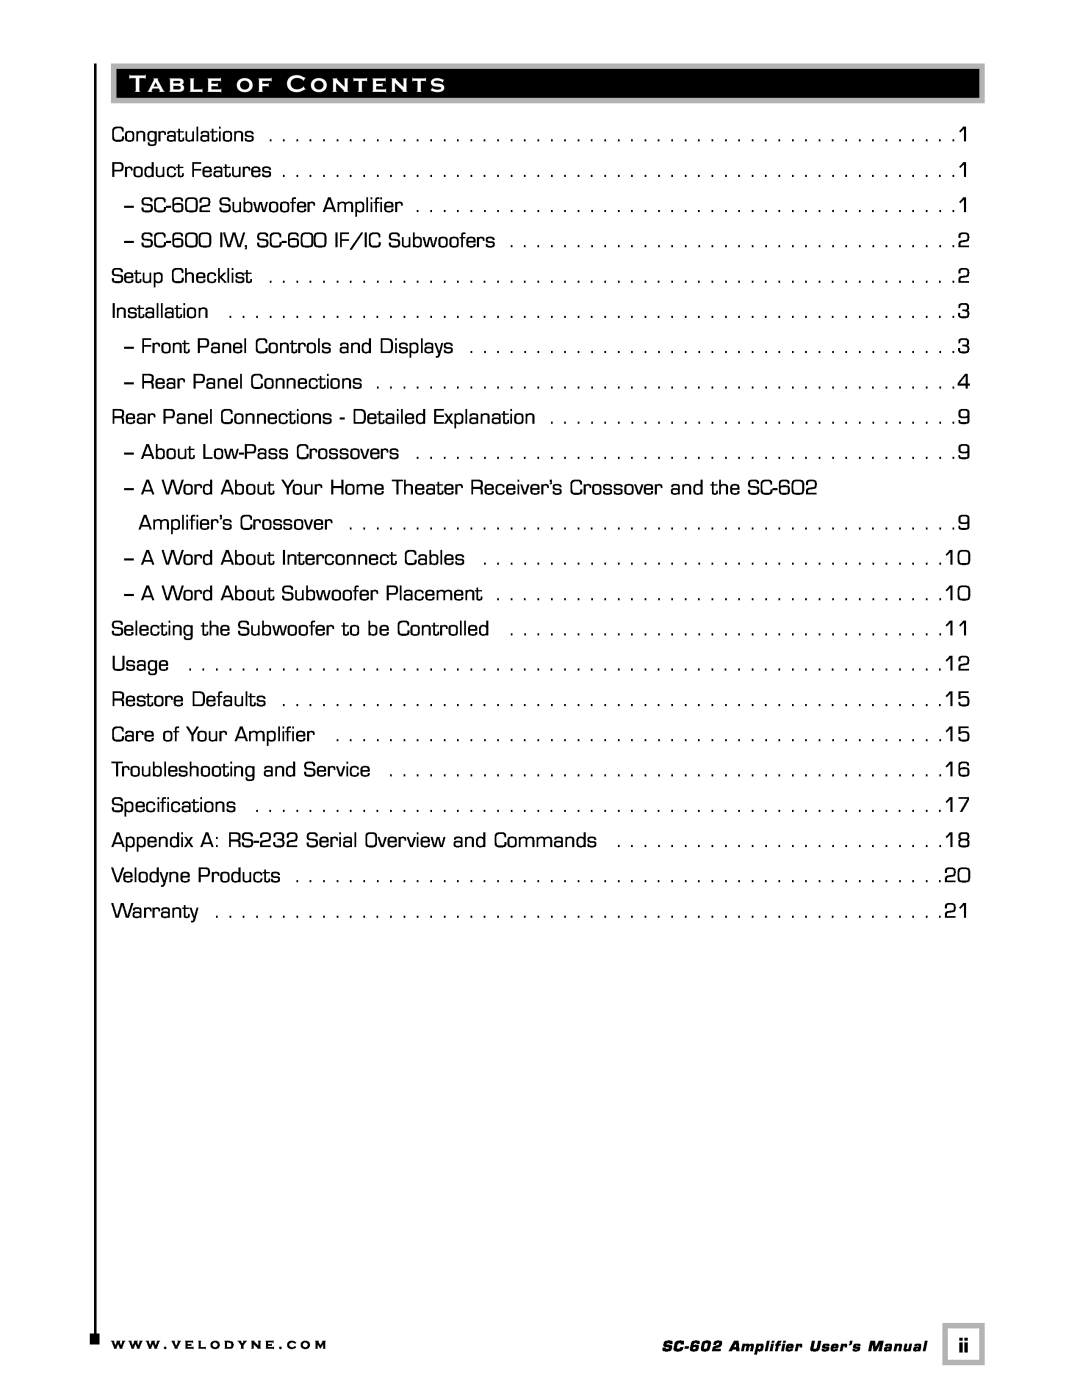 Velodyne Acoustics SC-602 user manual Table of Contents 